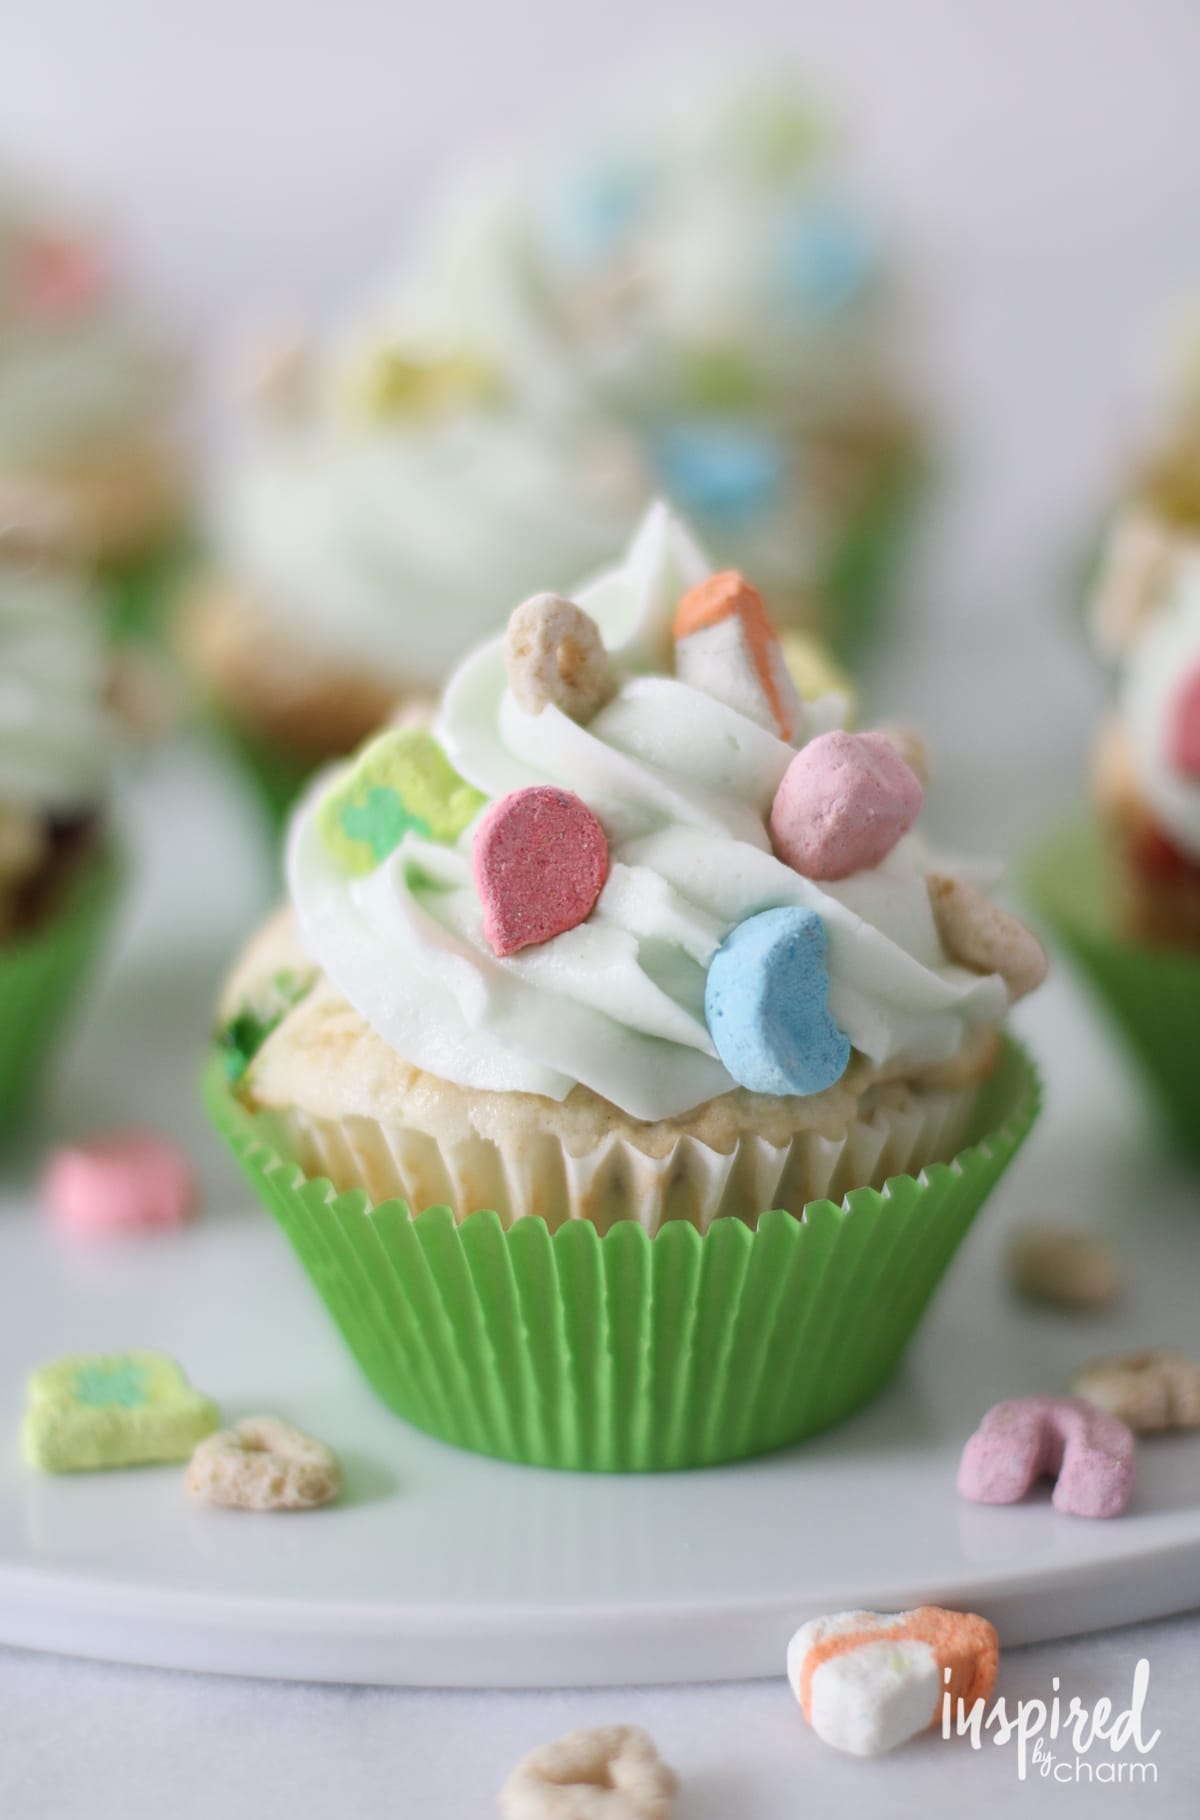 Homemade Lucky Charms - Are You Up for the Challenge? - Cupcake